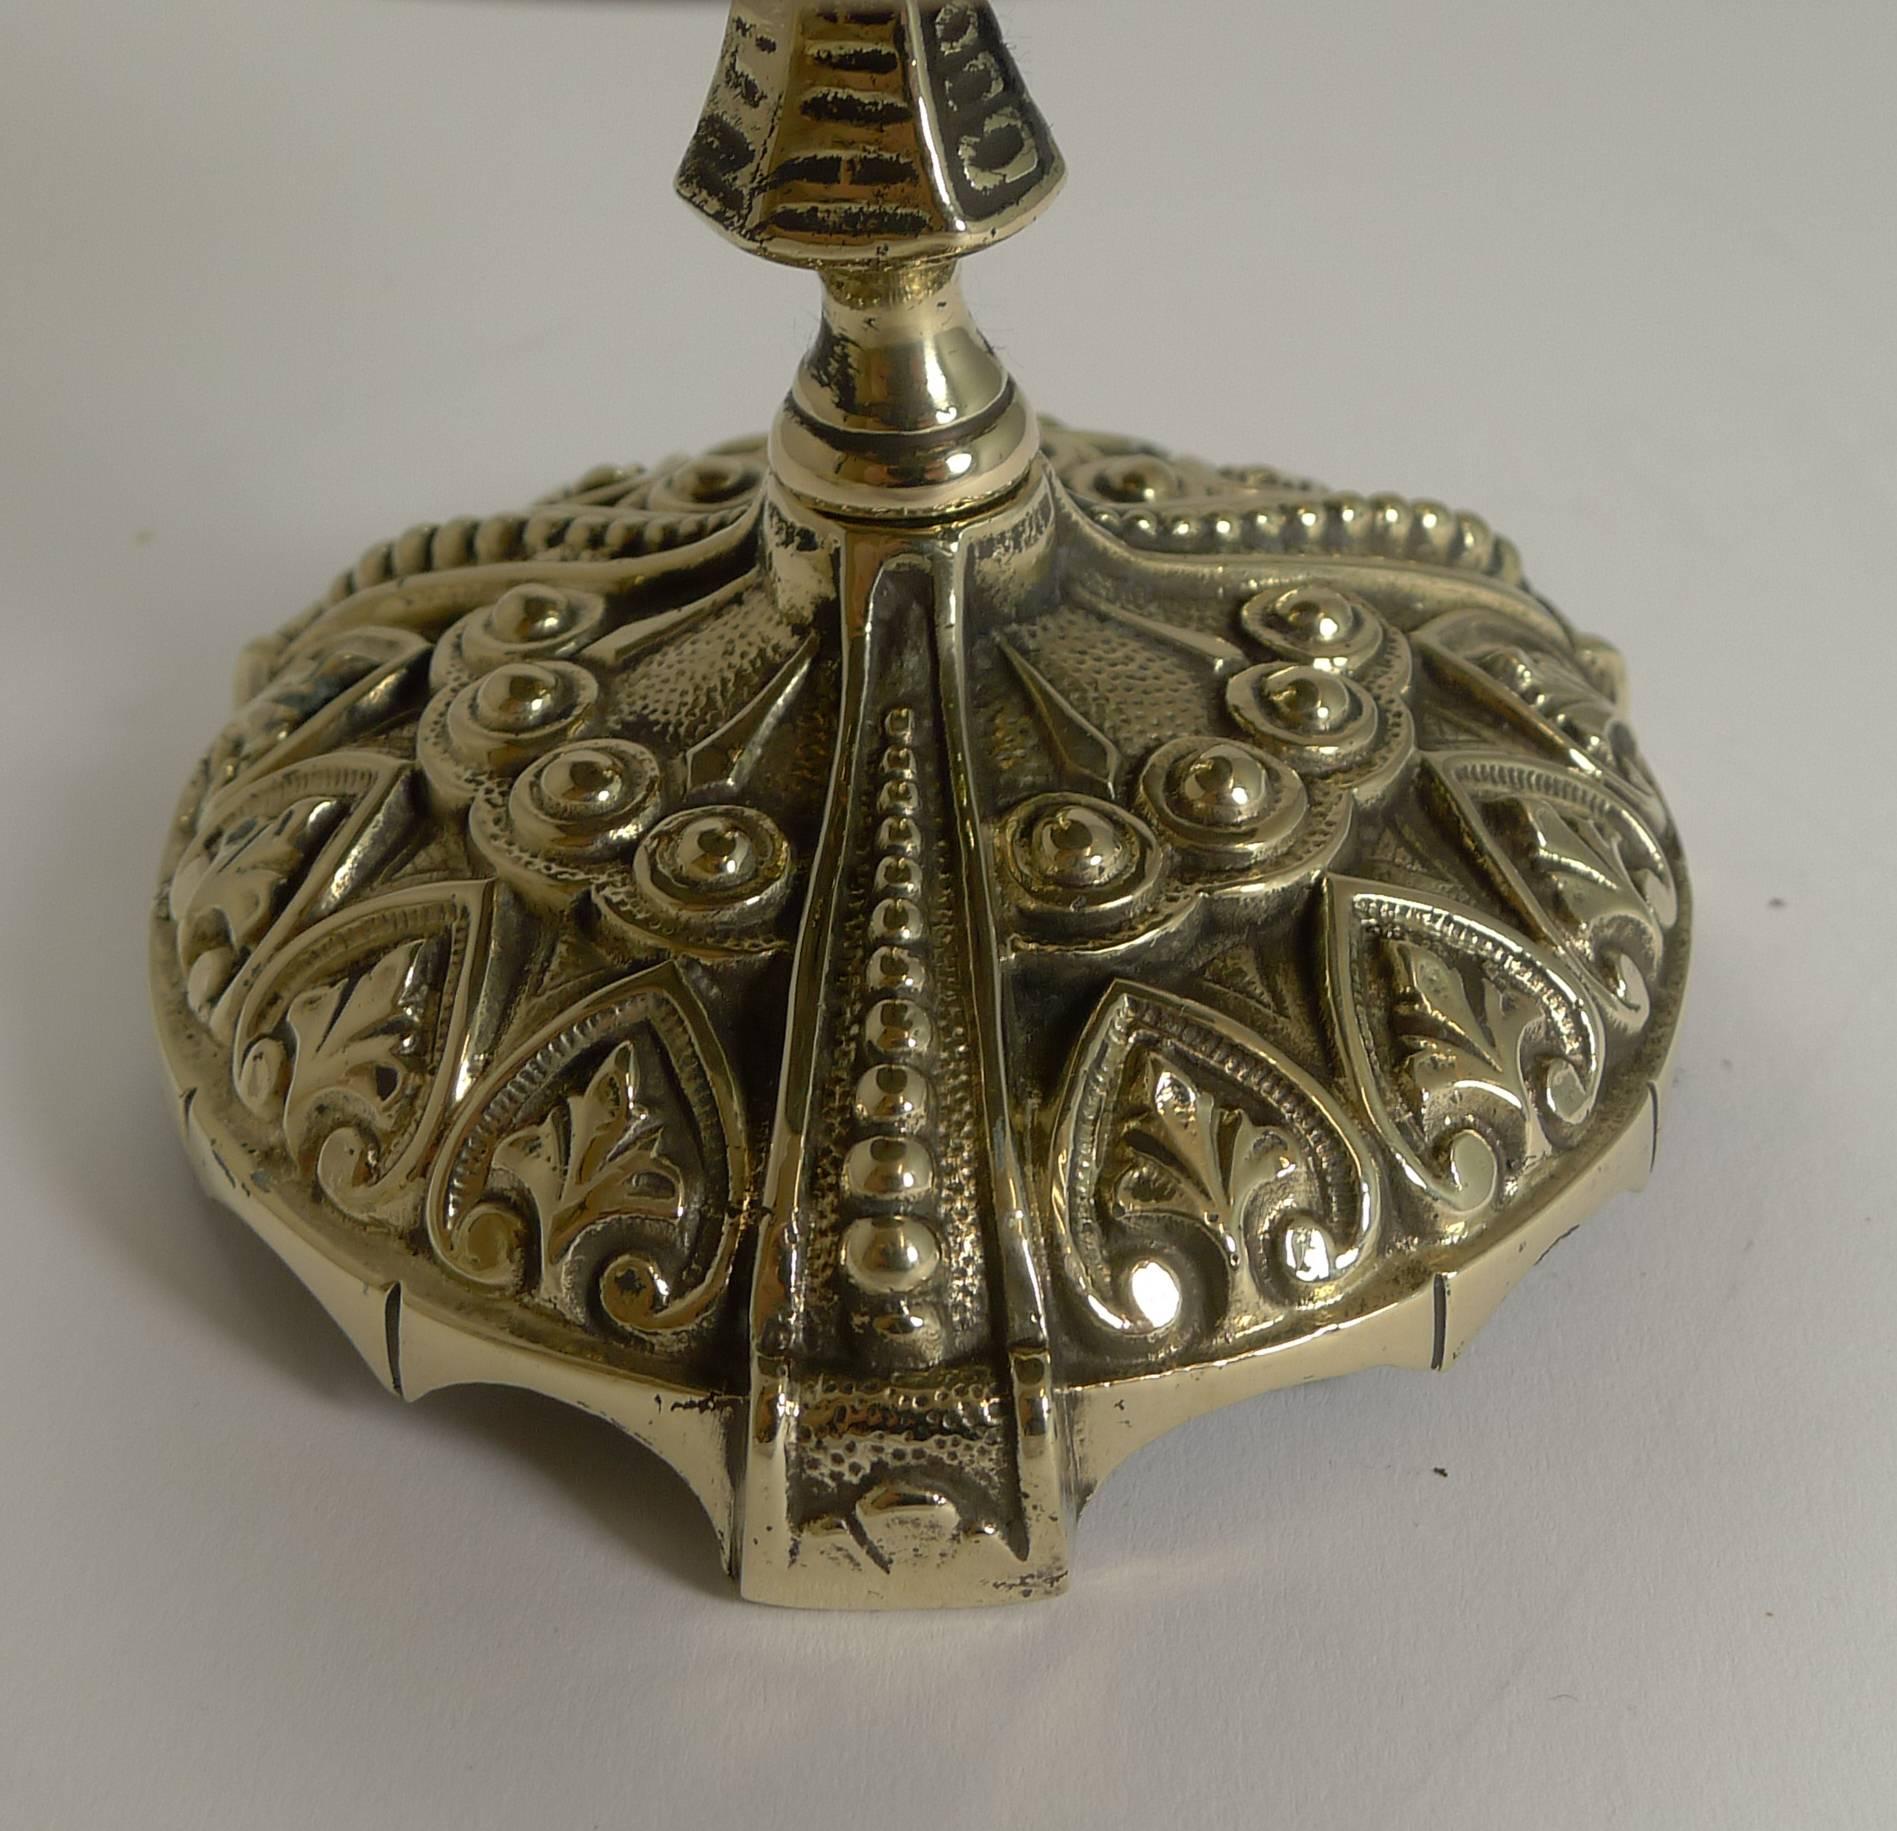 A wonderful and highly decorative desk or counter bell, my favourite kind with the more unusual clapper to the side rather than the ones you ring from the top. The hinged clapper is released and gives a clear and authoritative ring.

A true